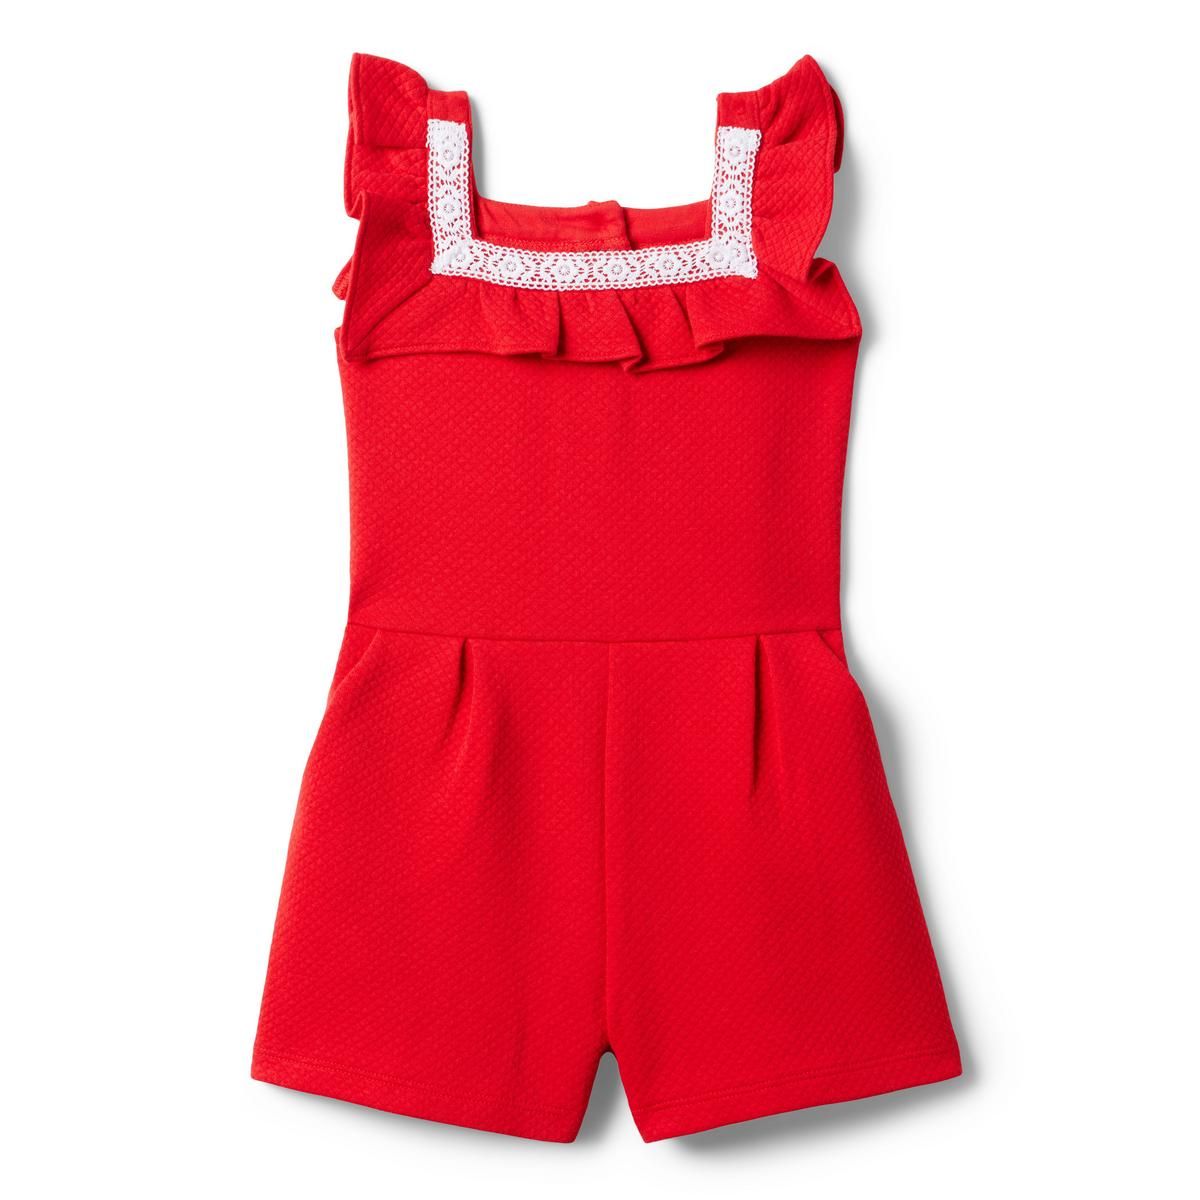 Quilted Crochet Trim Romper | Janie and Jack